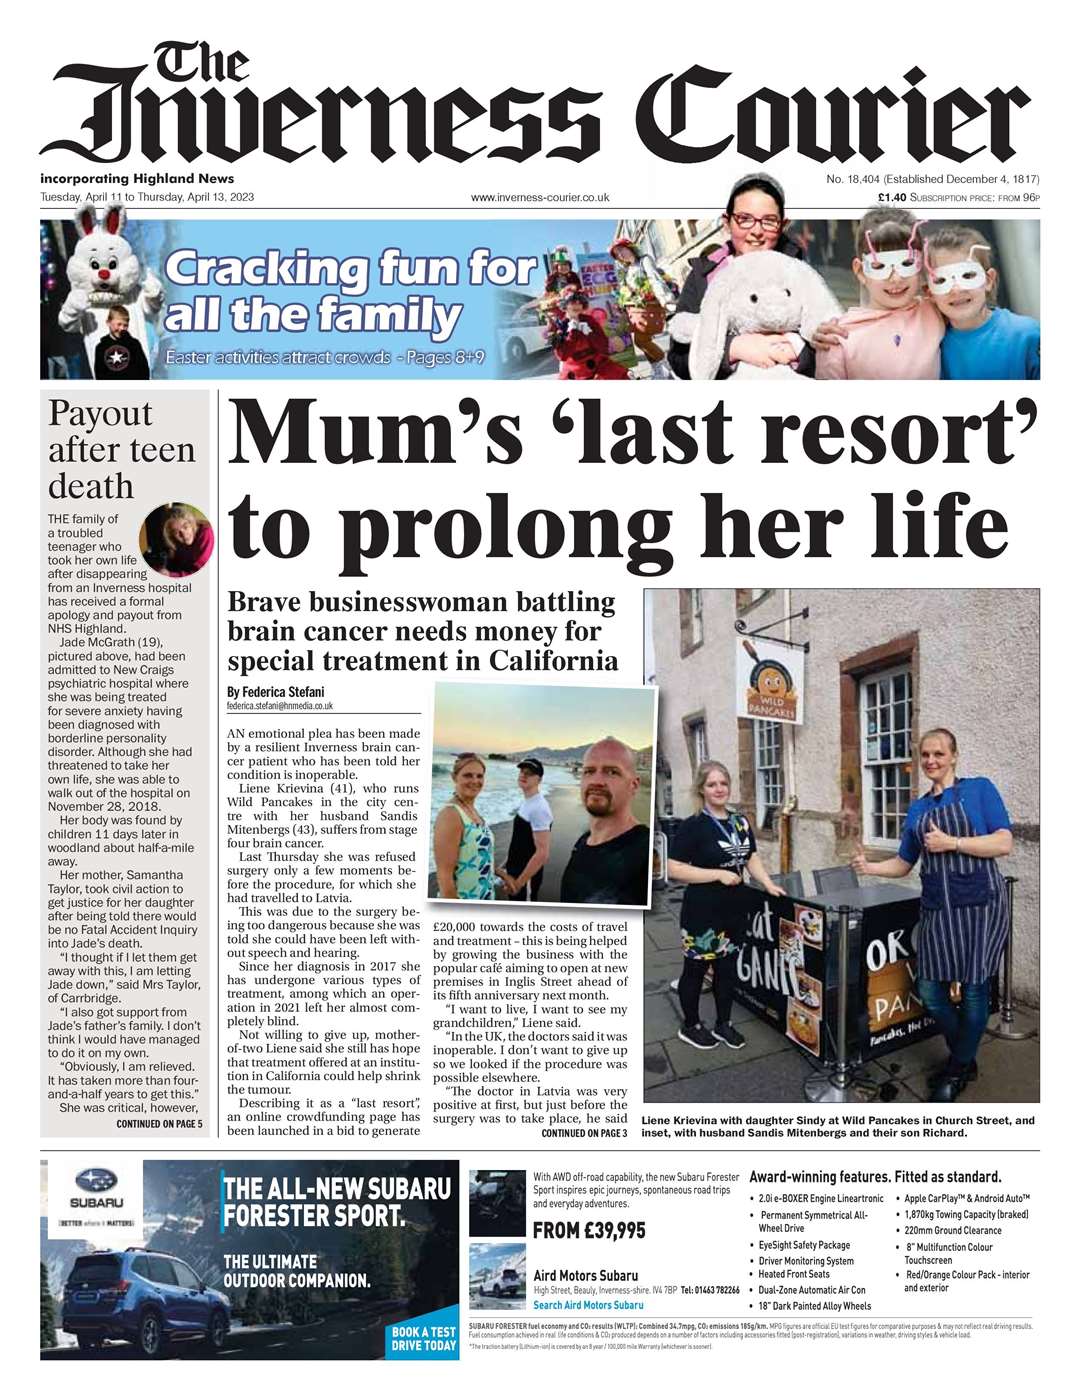 The Inverness Courier, April 11, front page.